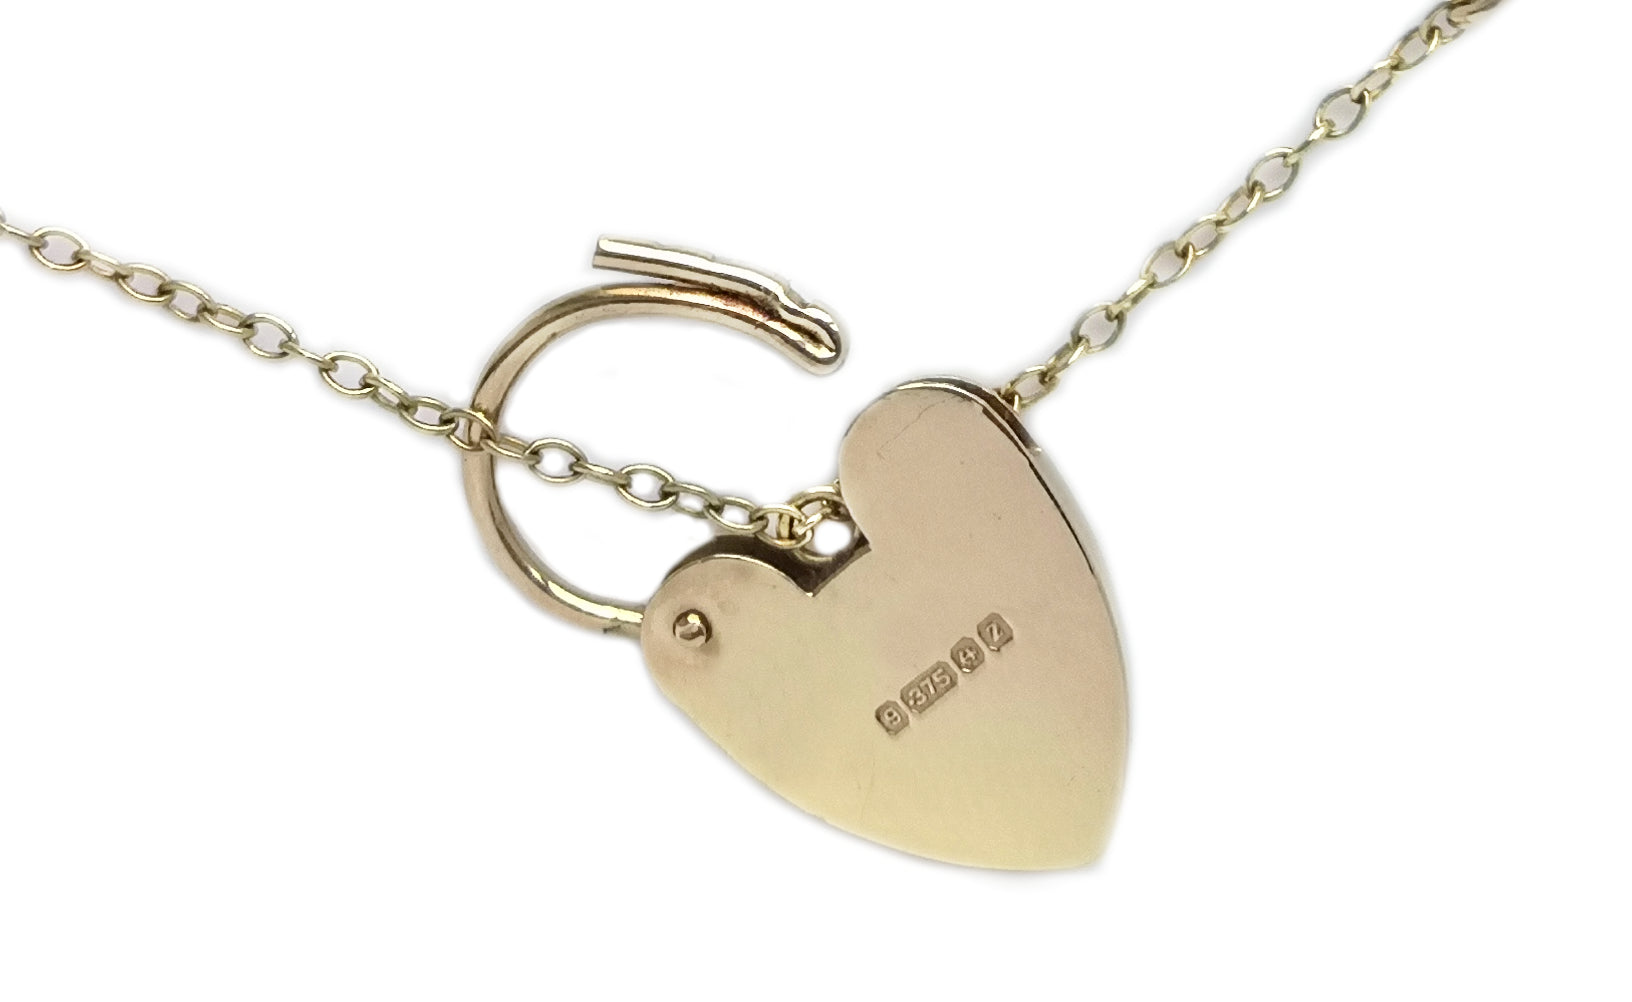 Solid 9ct Yellow Gold Heart Padlock Curb Link Bracelet 36g 6.75"